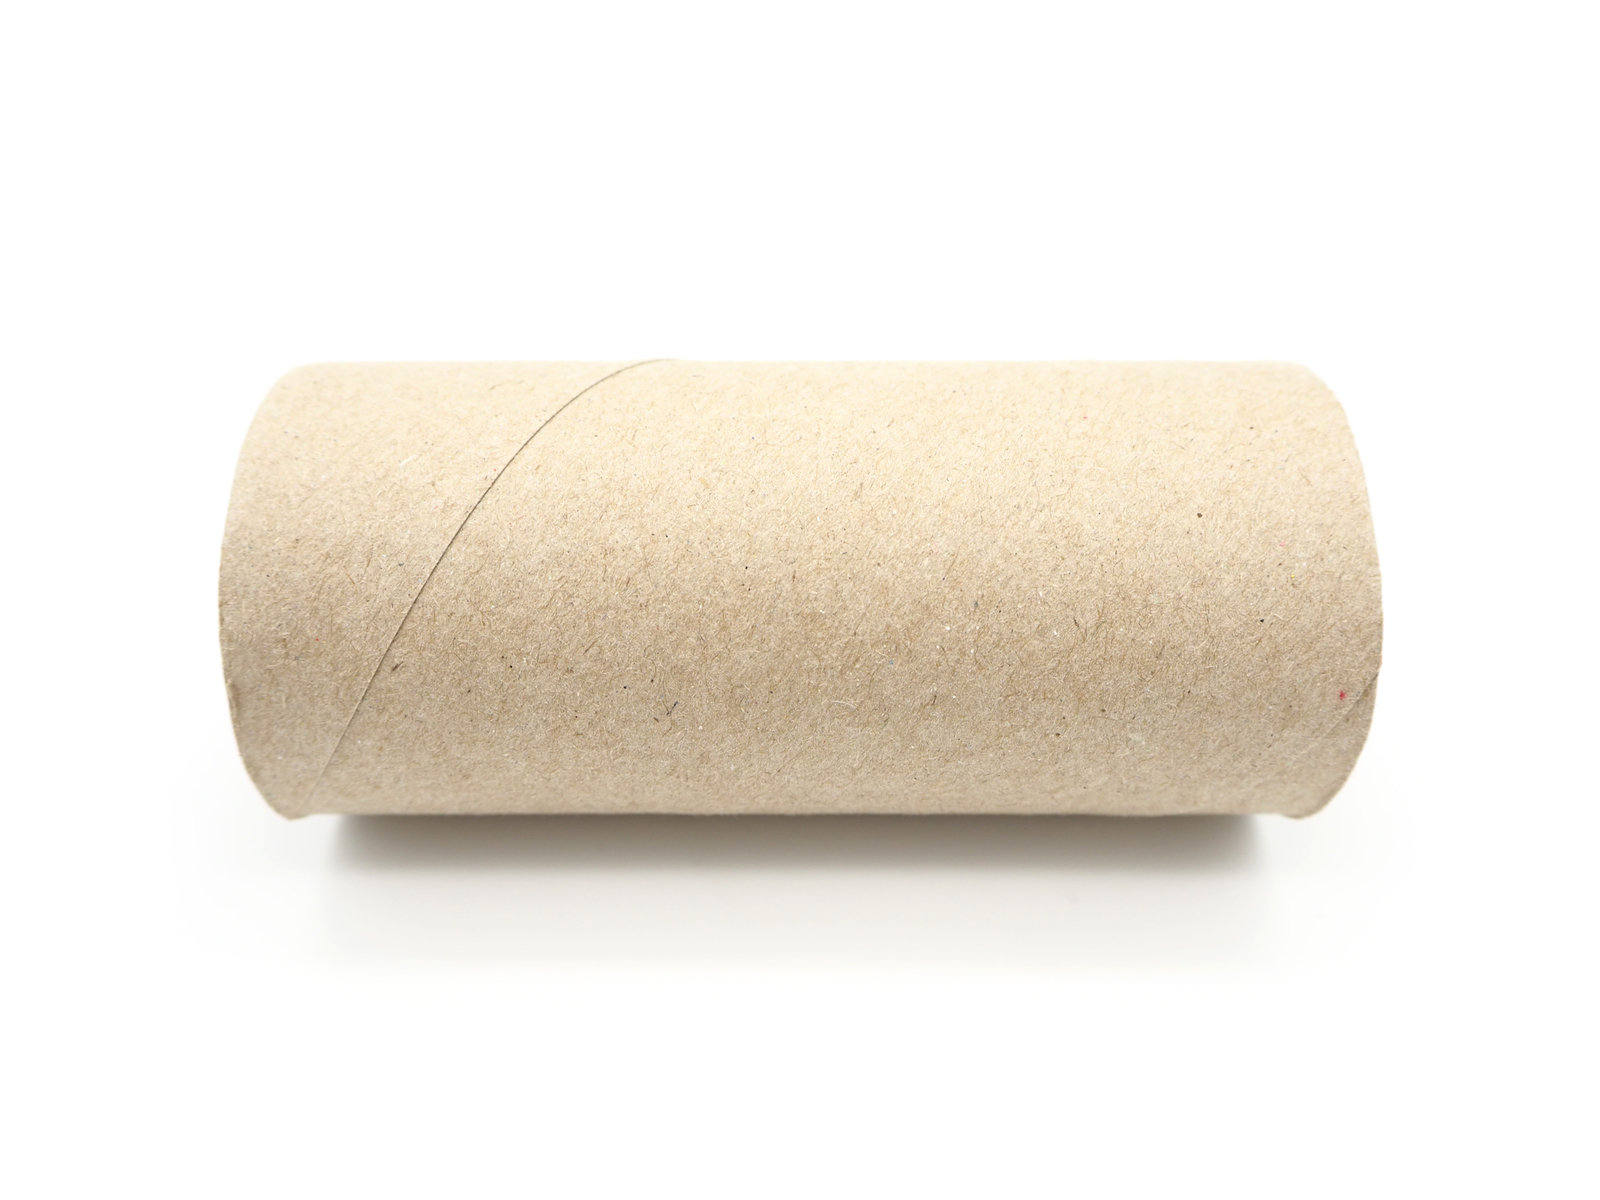 Can You Compost Toilet Paper Rolls (or Paper Towel Rolls)?